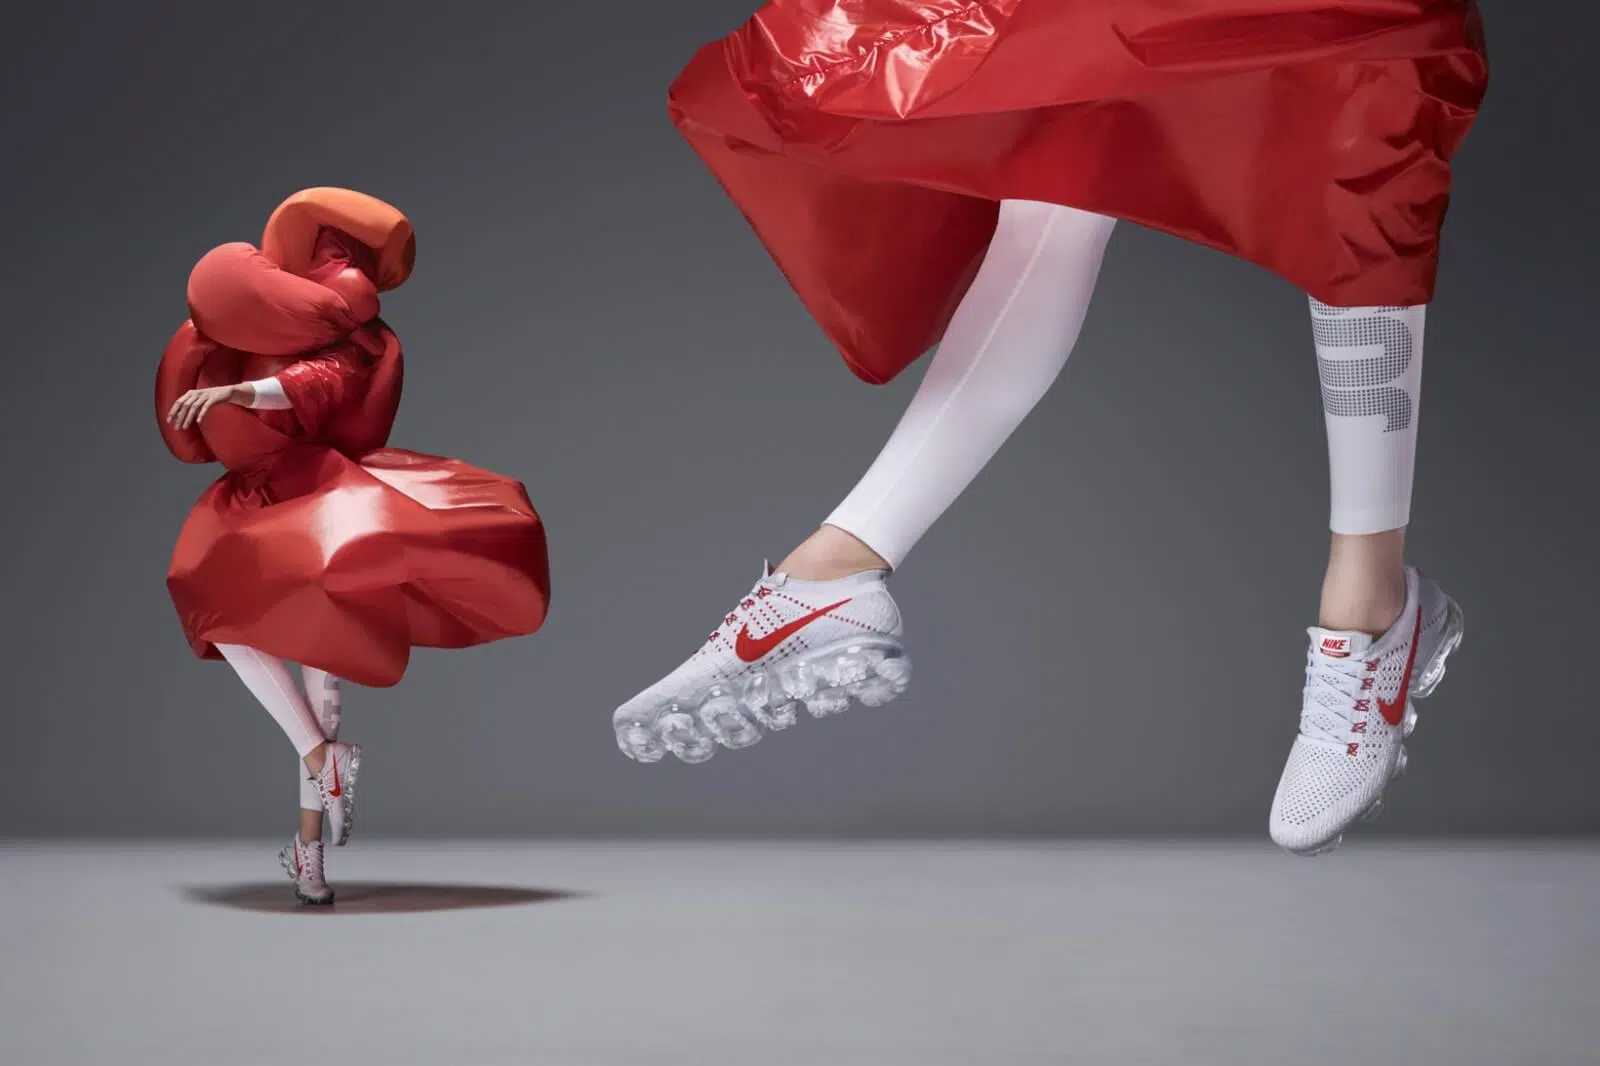 Nike Experiments In Style & Walks on Air